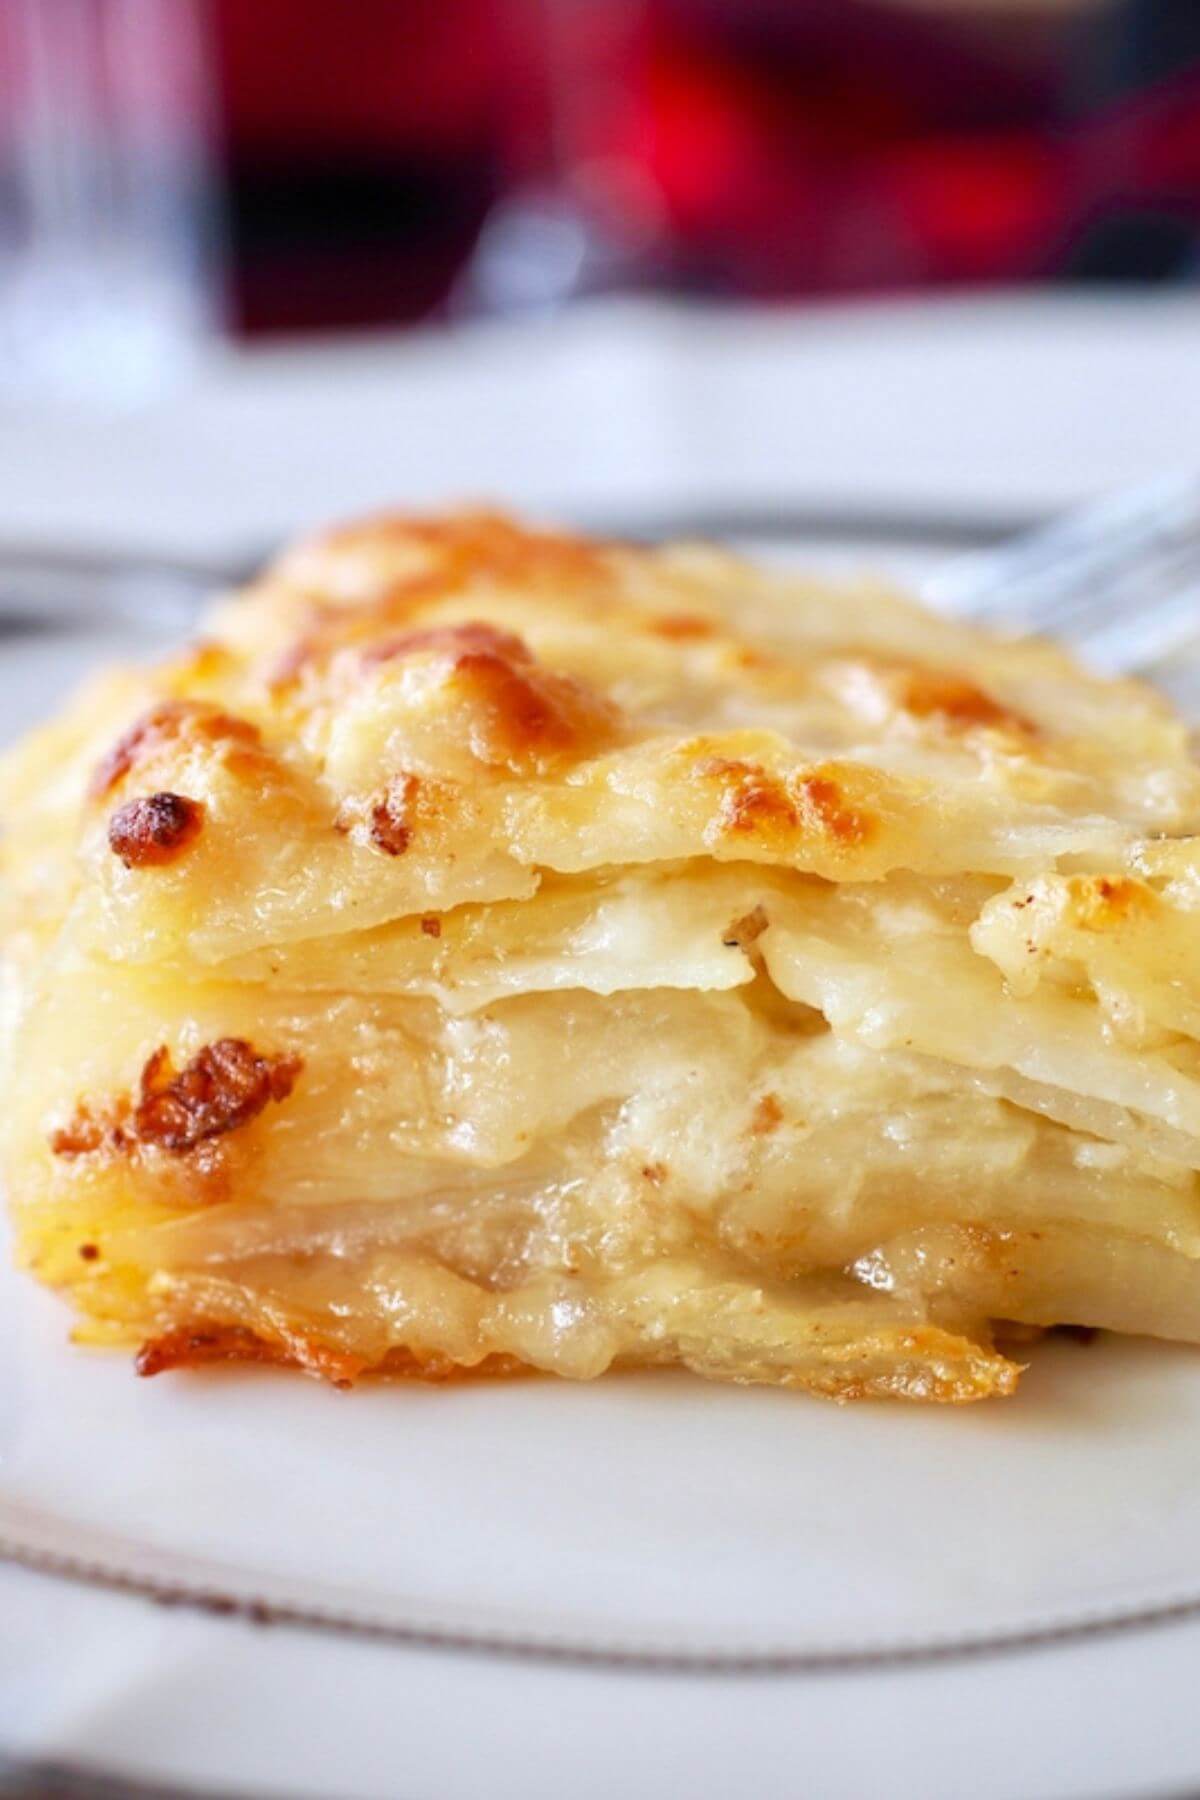 Layers of golden potatoes dauphinoise on a plate.